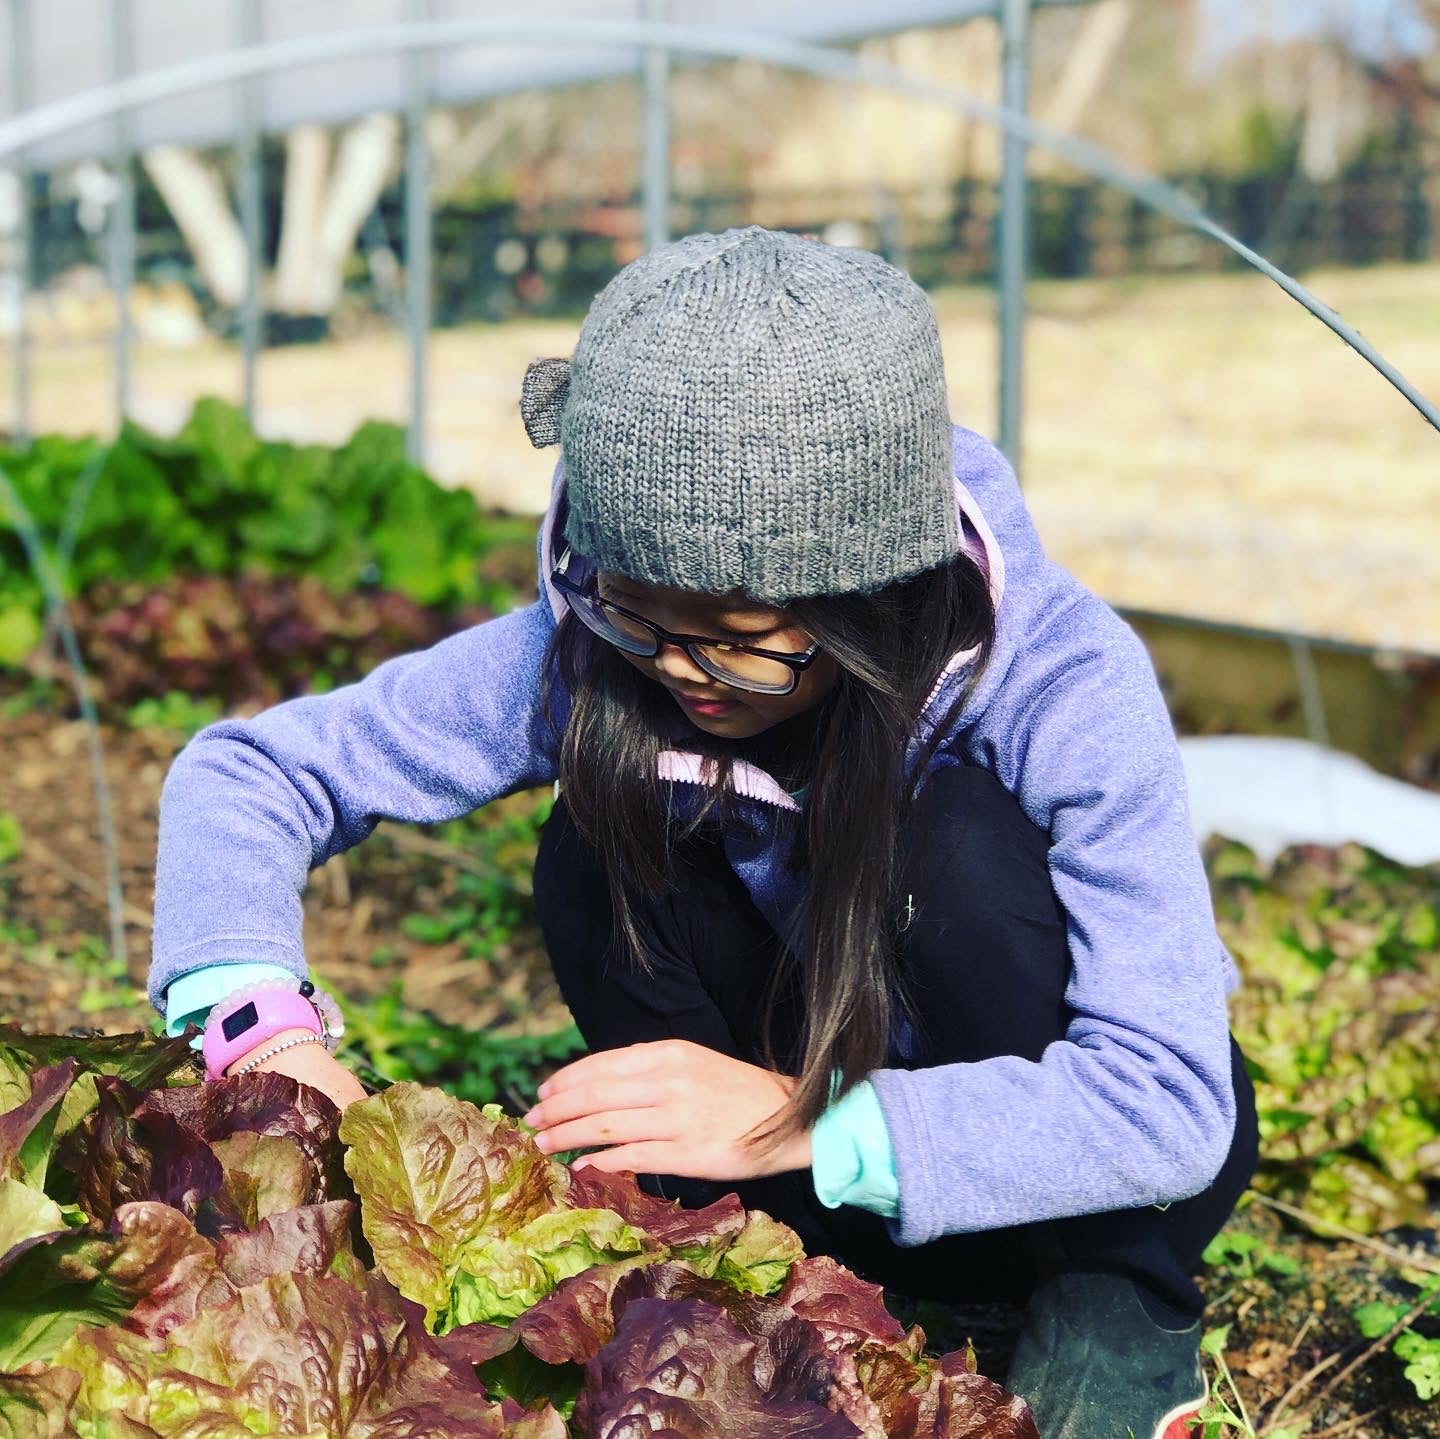 The farmer's daughter examining a big head of lettuce in the winter greenhouse